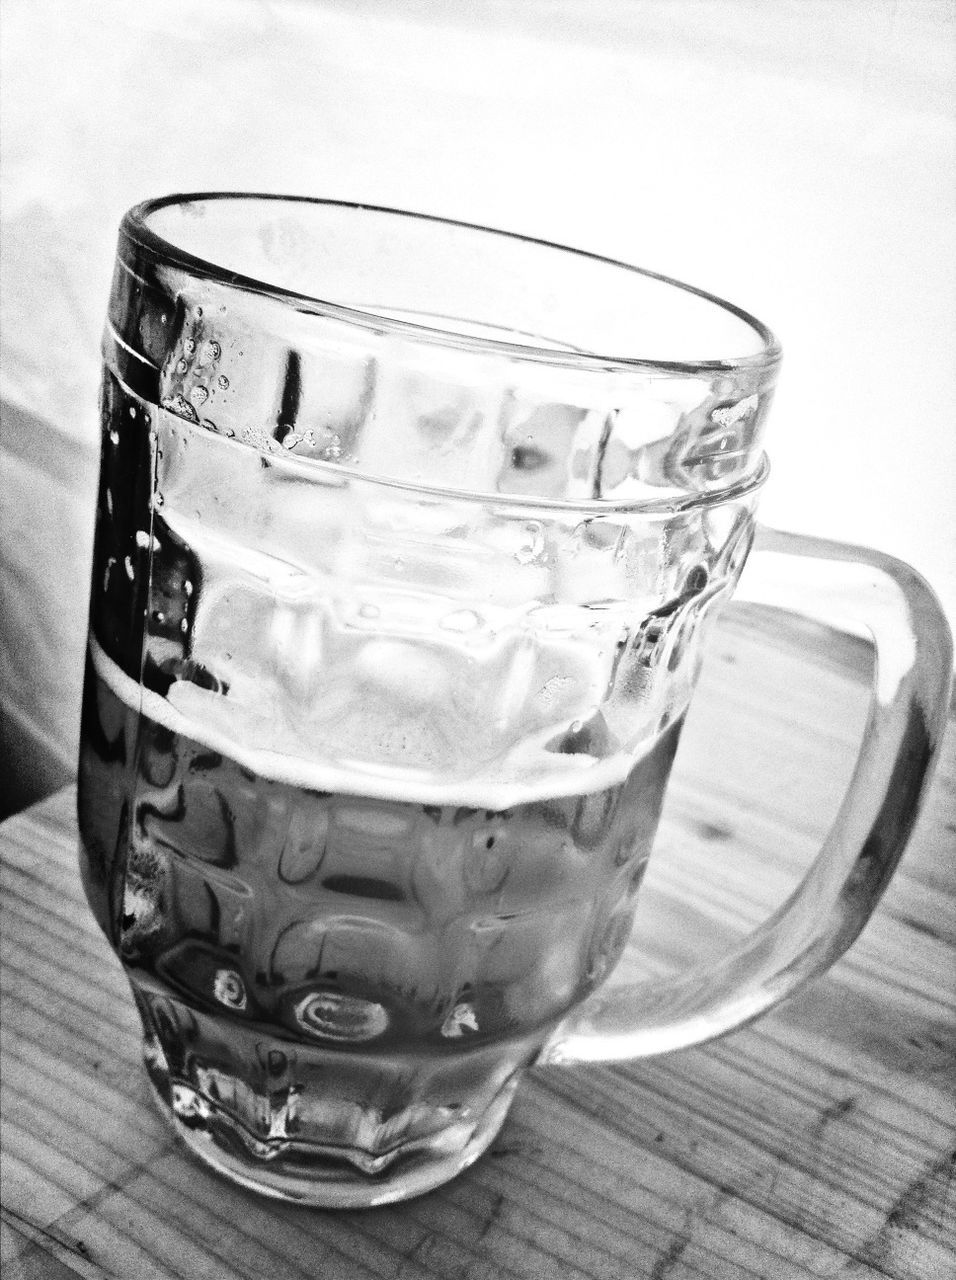 Close-up of beer mug on table